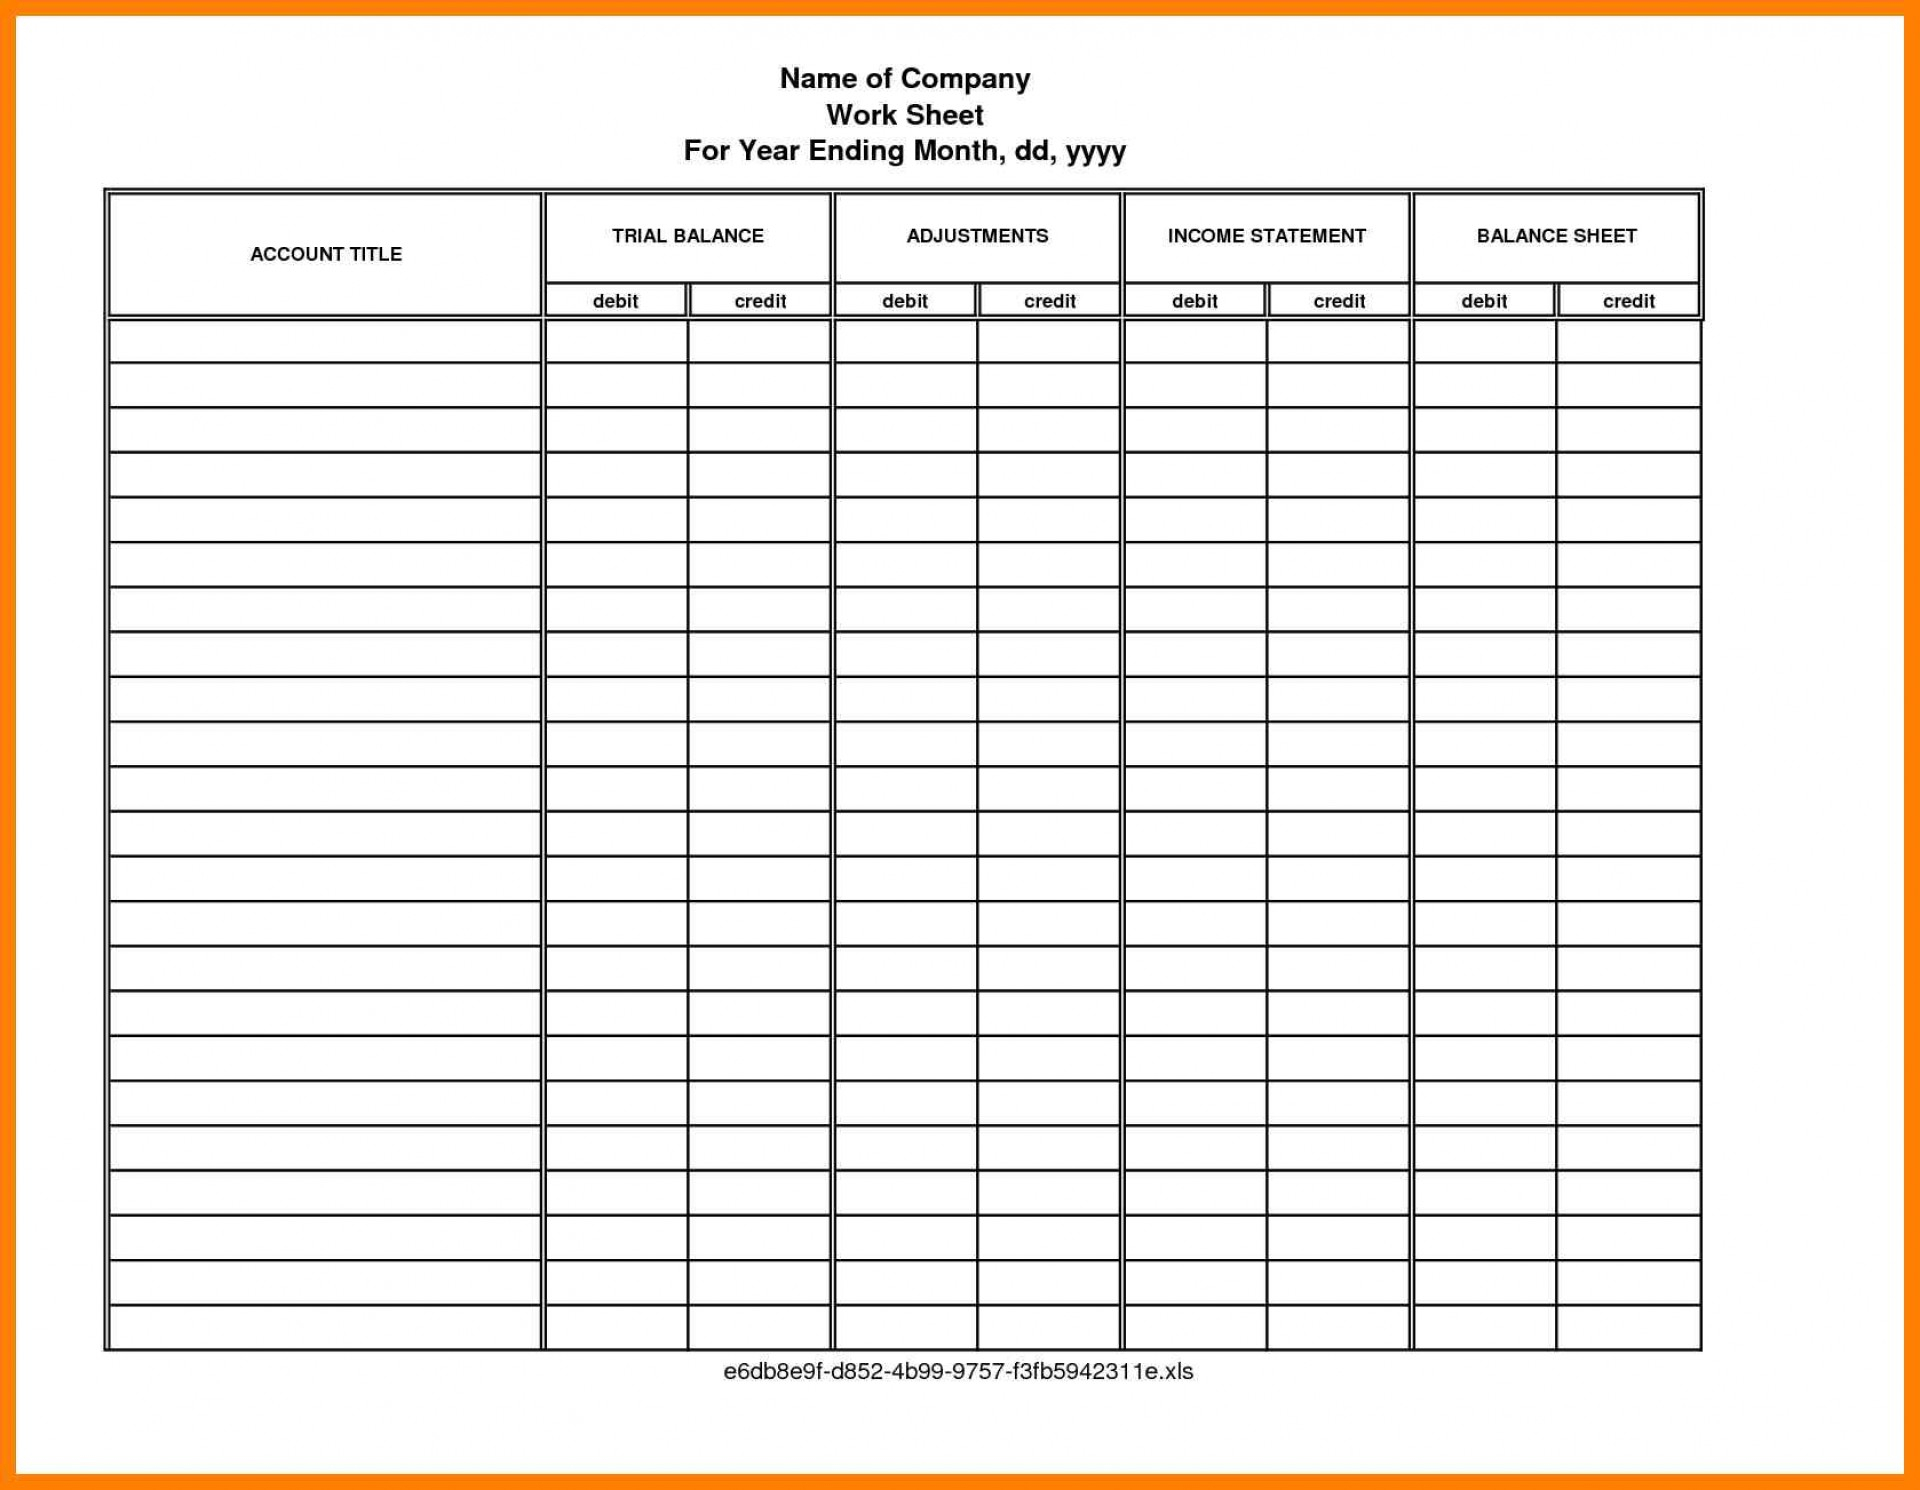 free-printable-accounting-forms